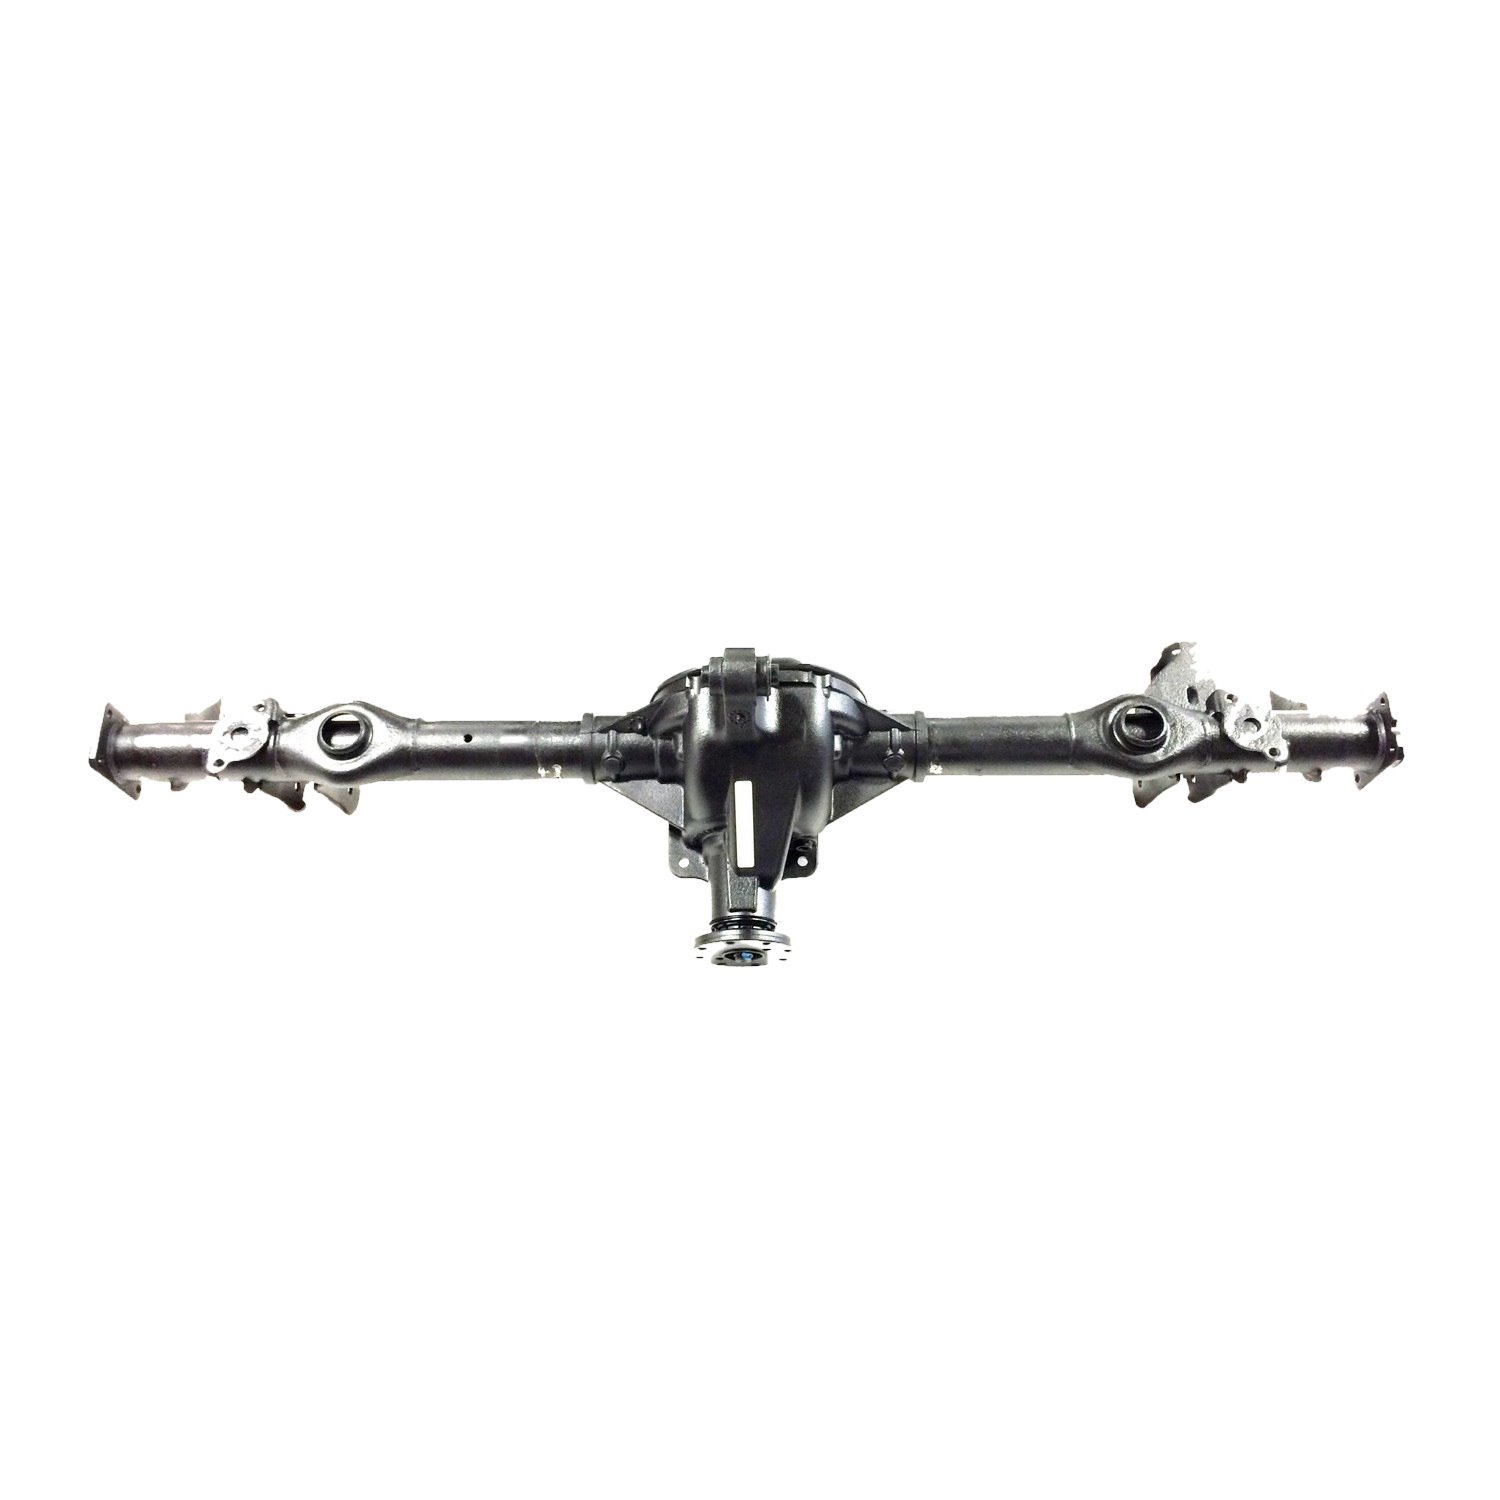 Remanufactured Axle Assembly for 2012 Liberty Limited Jet Edition with 3:73 Gear